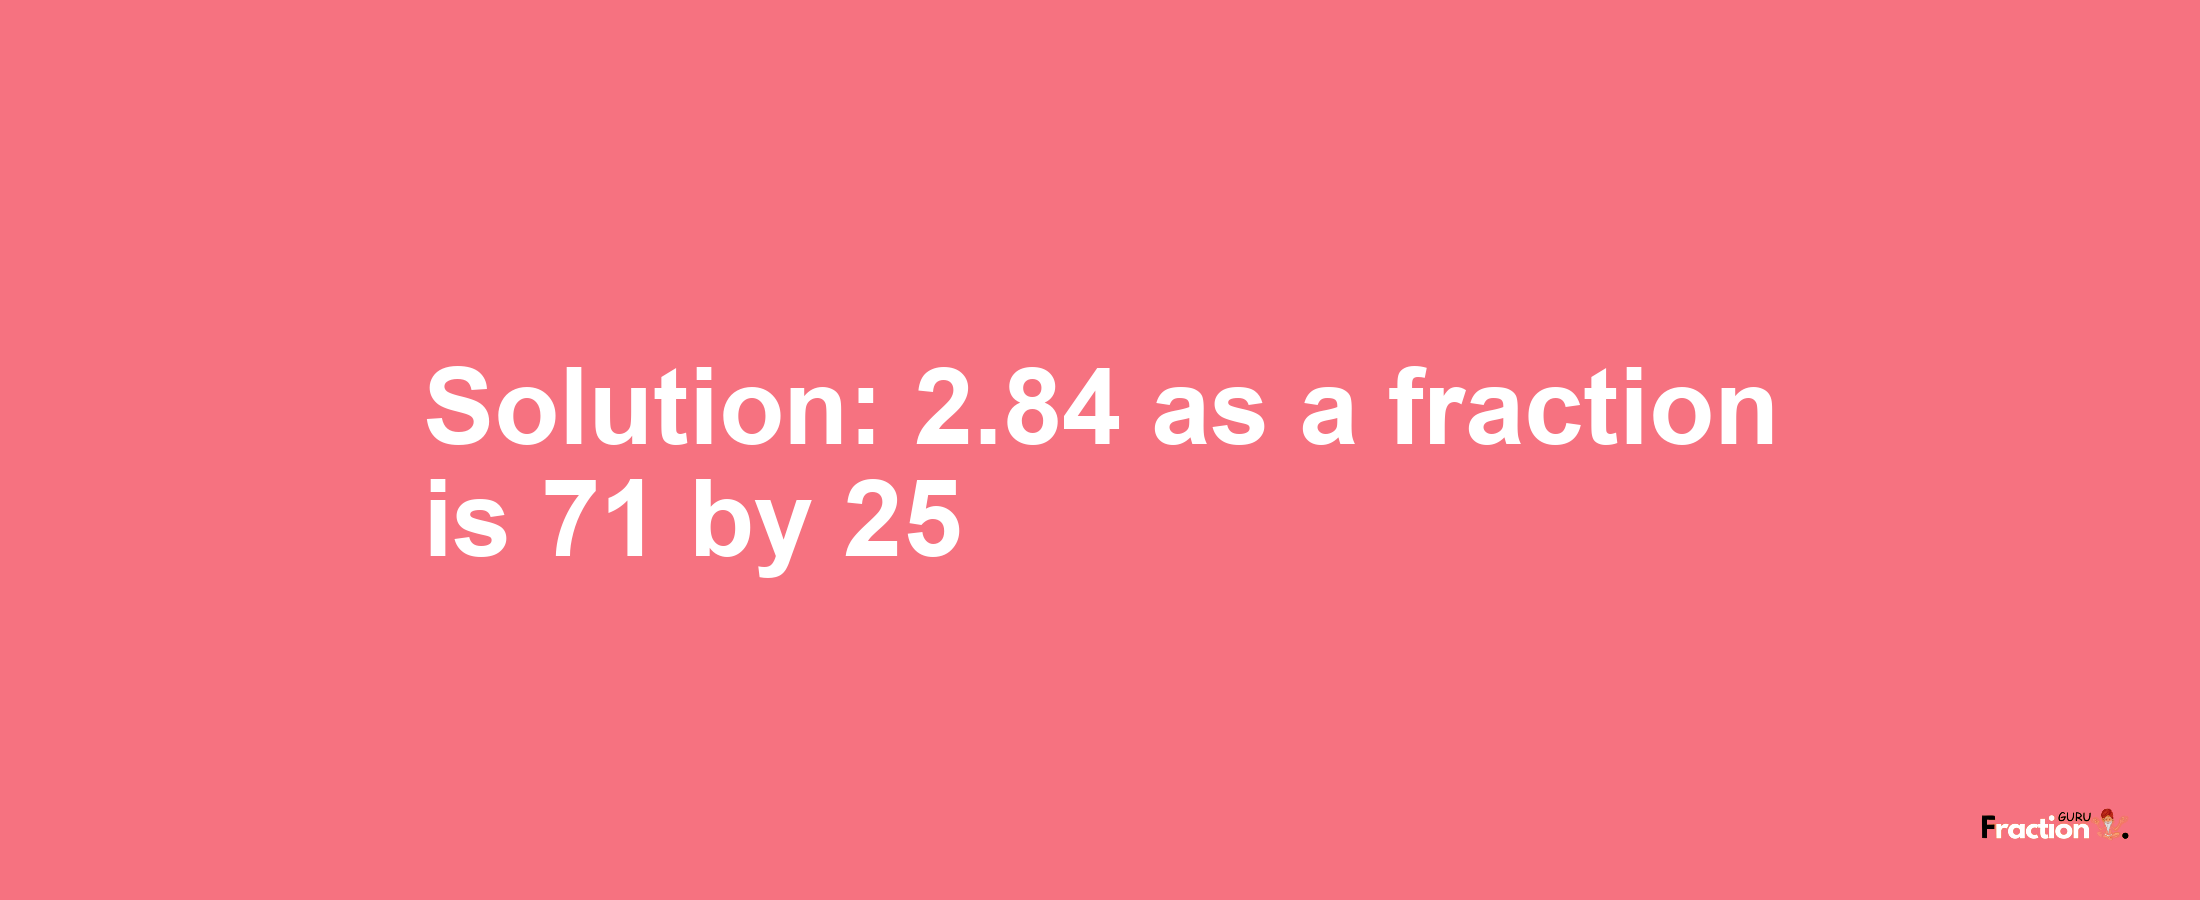 Solution:2.84 as a fraction is 71/25